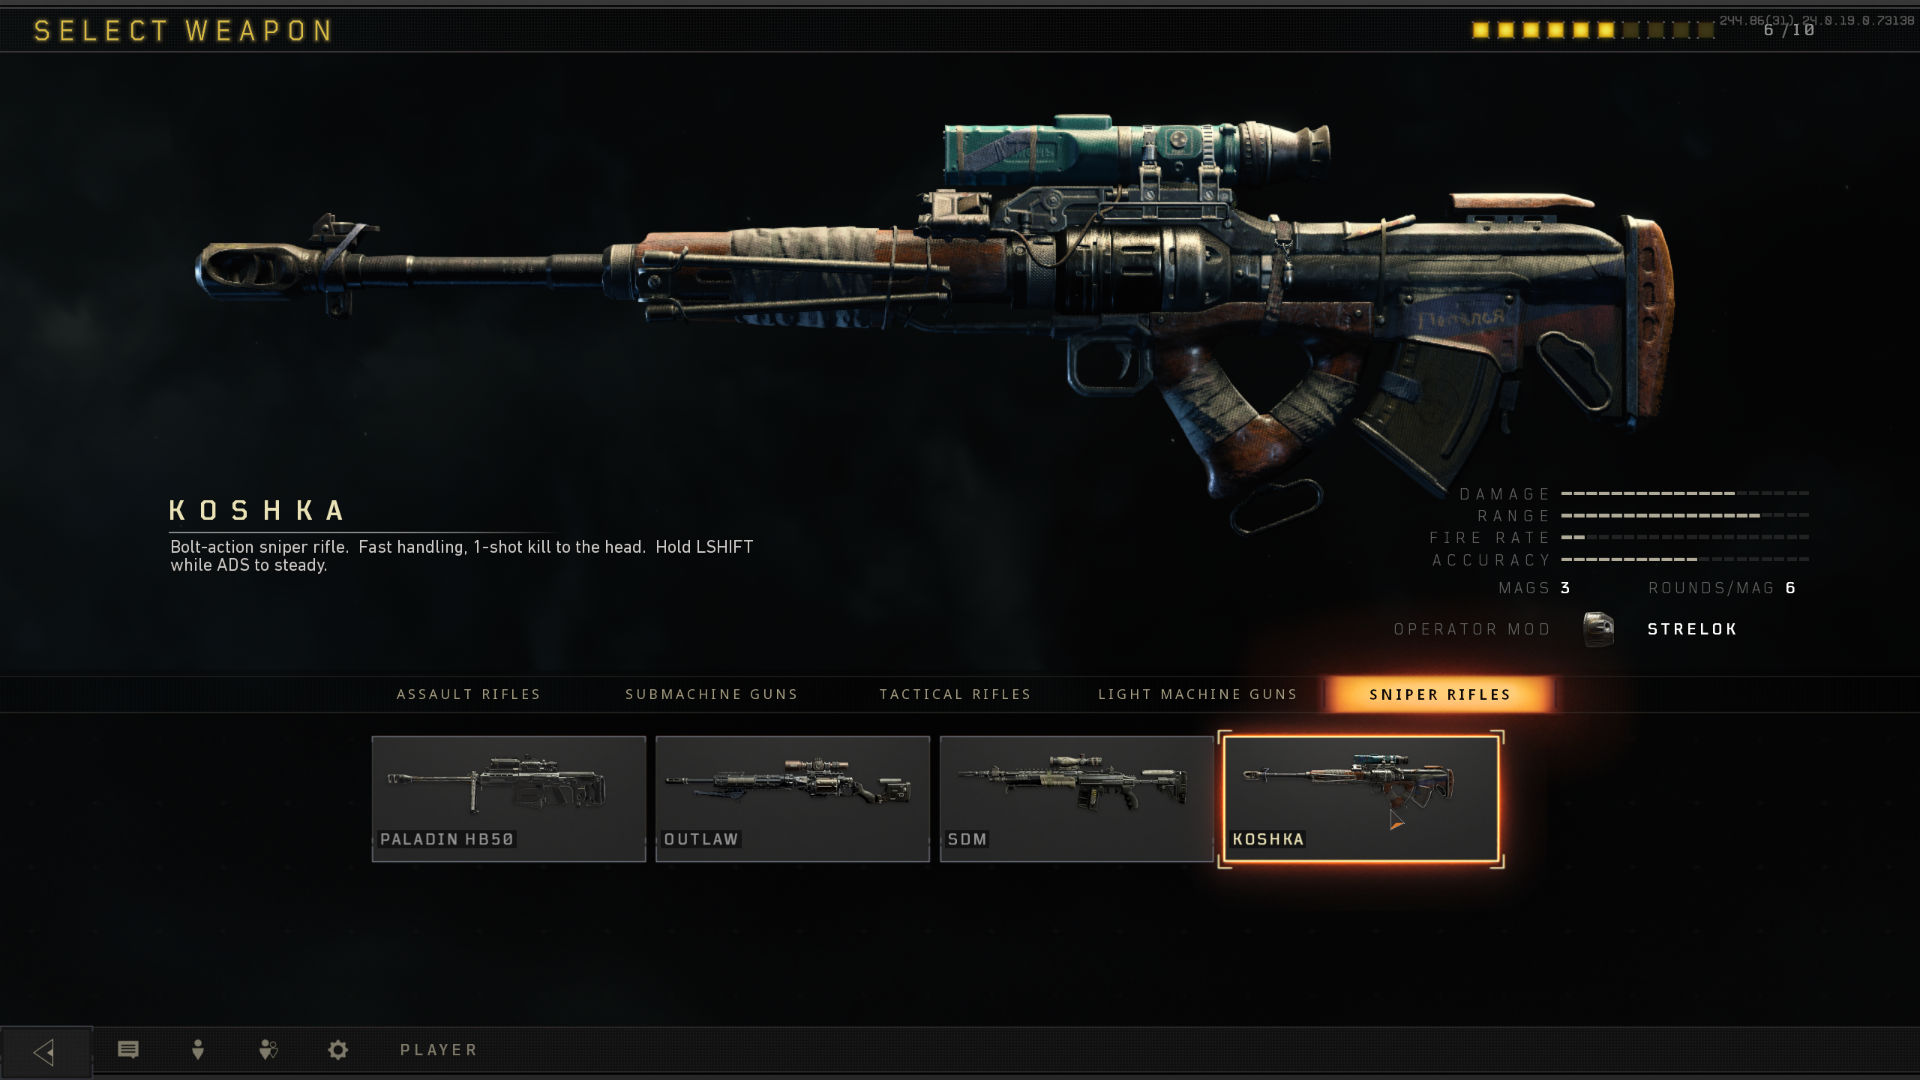 All Blackout Weapons The Best Guns For Call Of Duty Black Ops 4 Battle Royale Pcgamesn